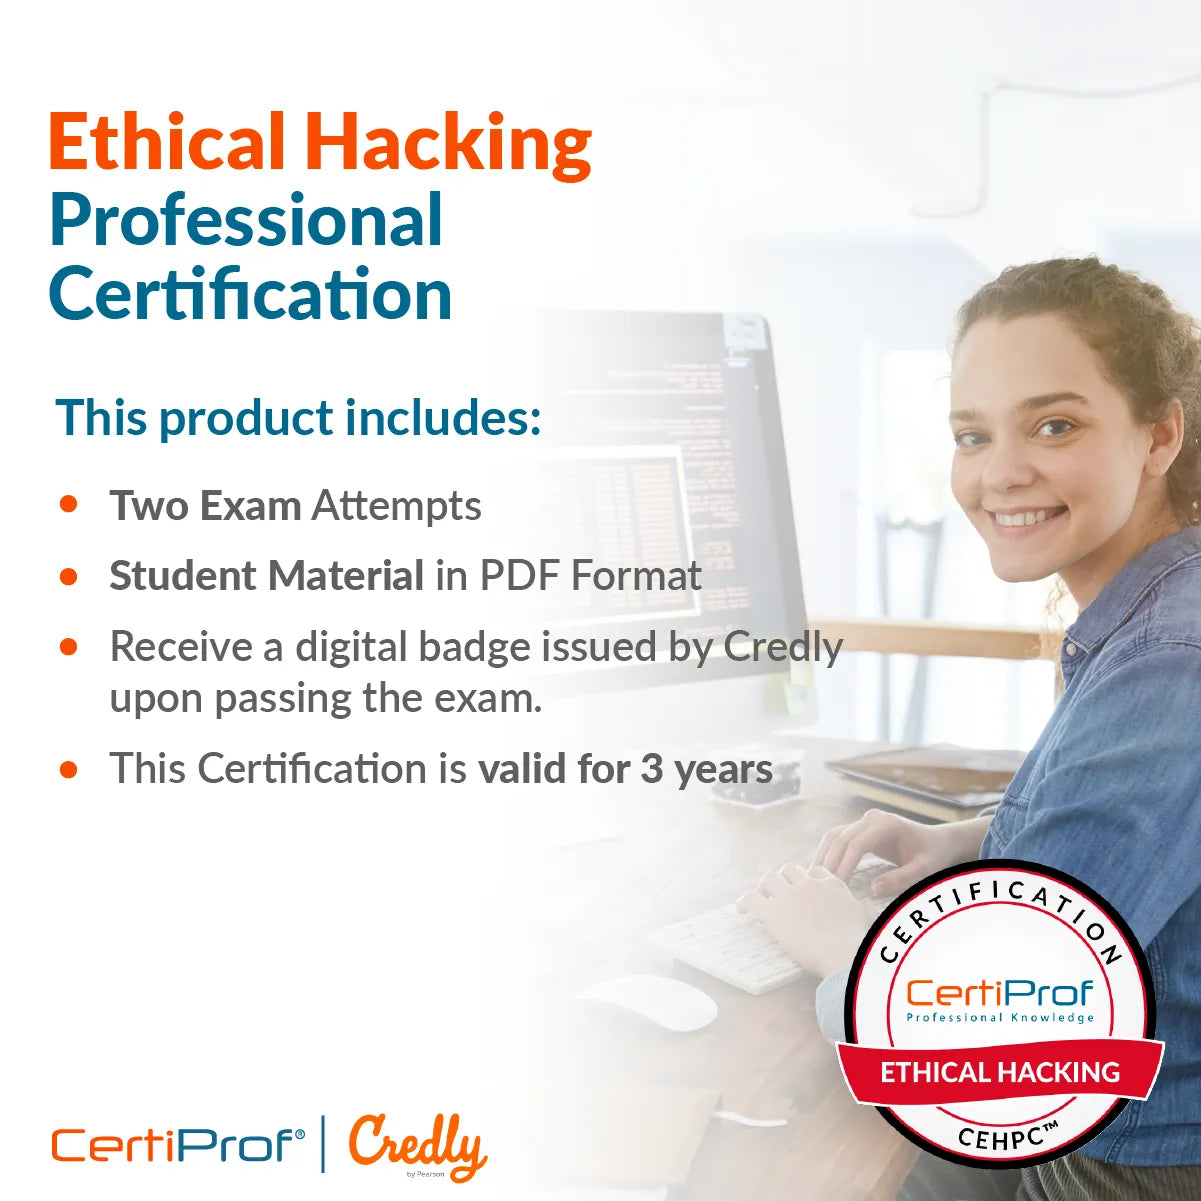 EthicalHacking CEH Professional Certification